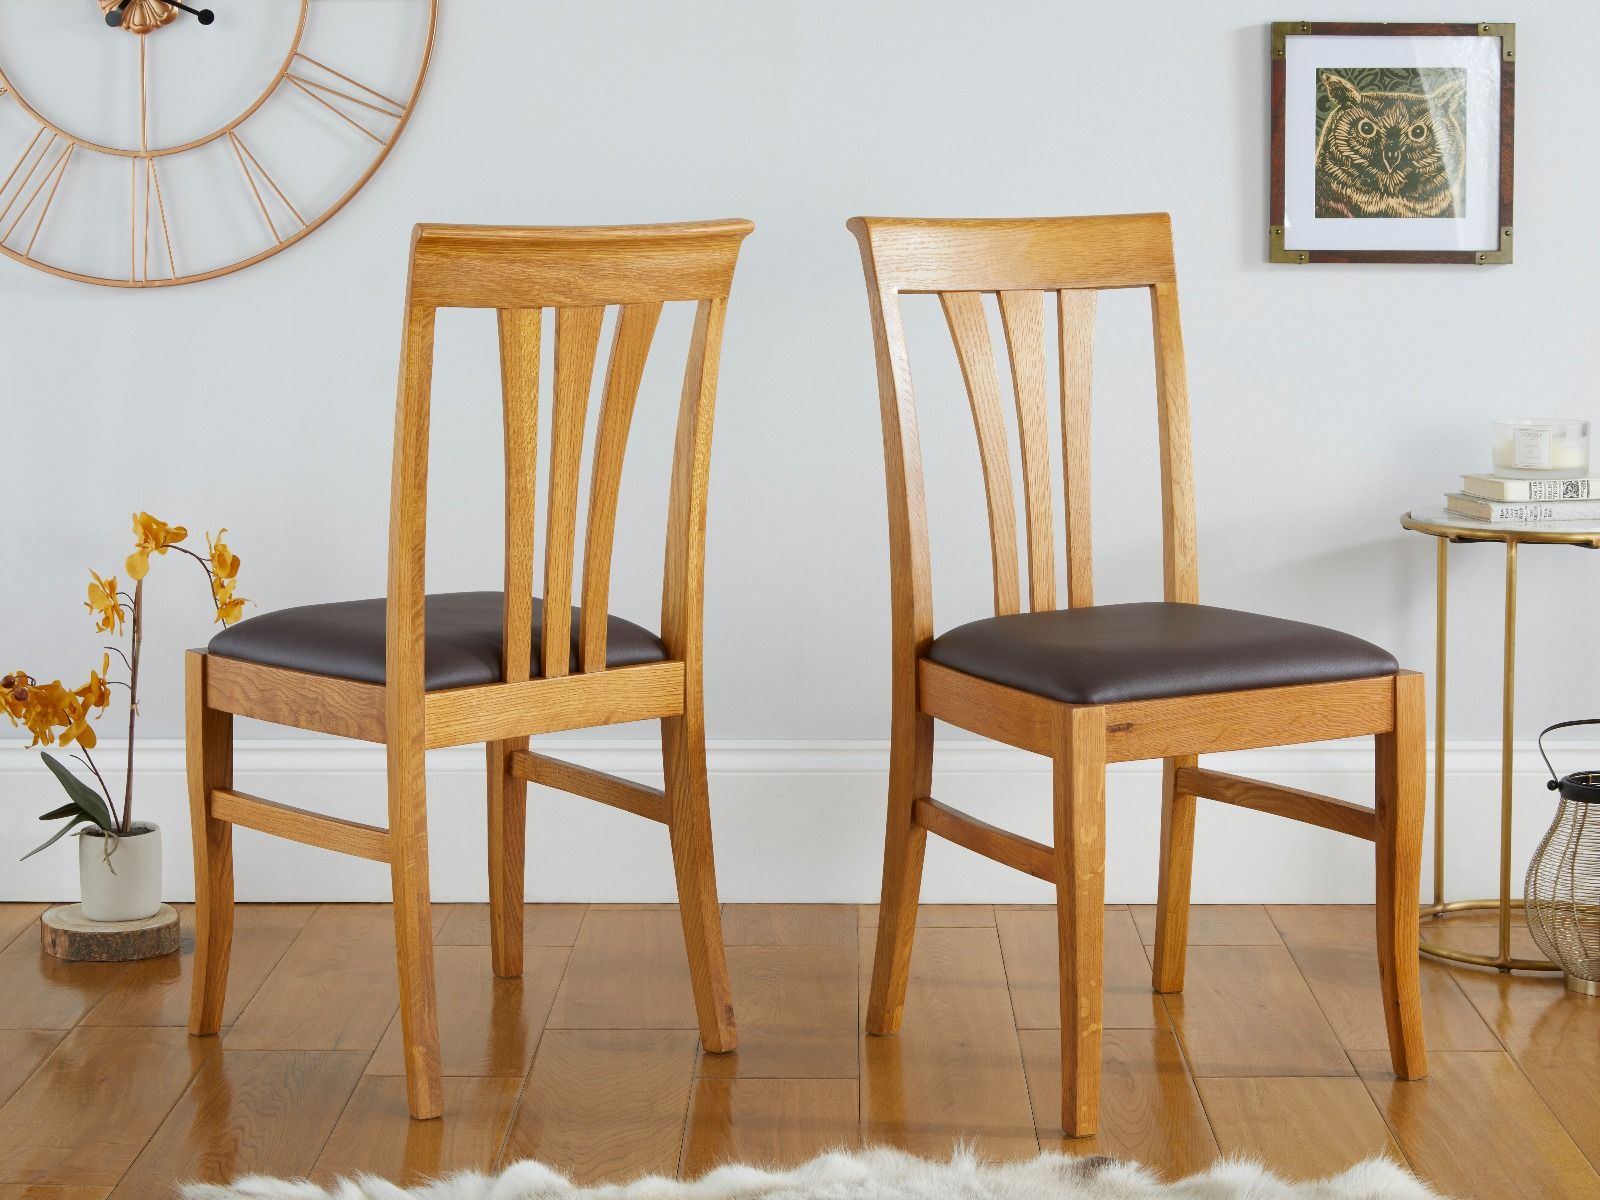 How To Replace The Leather Seat Of A Dining Chair